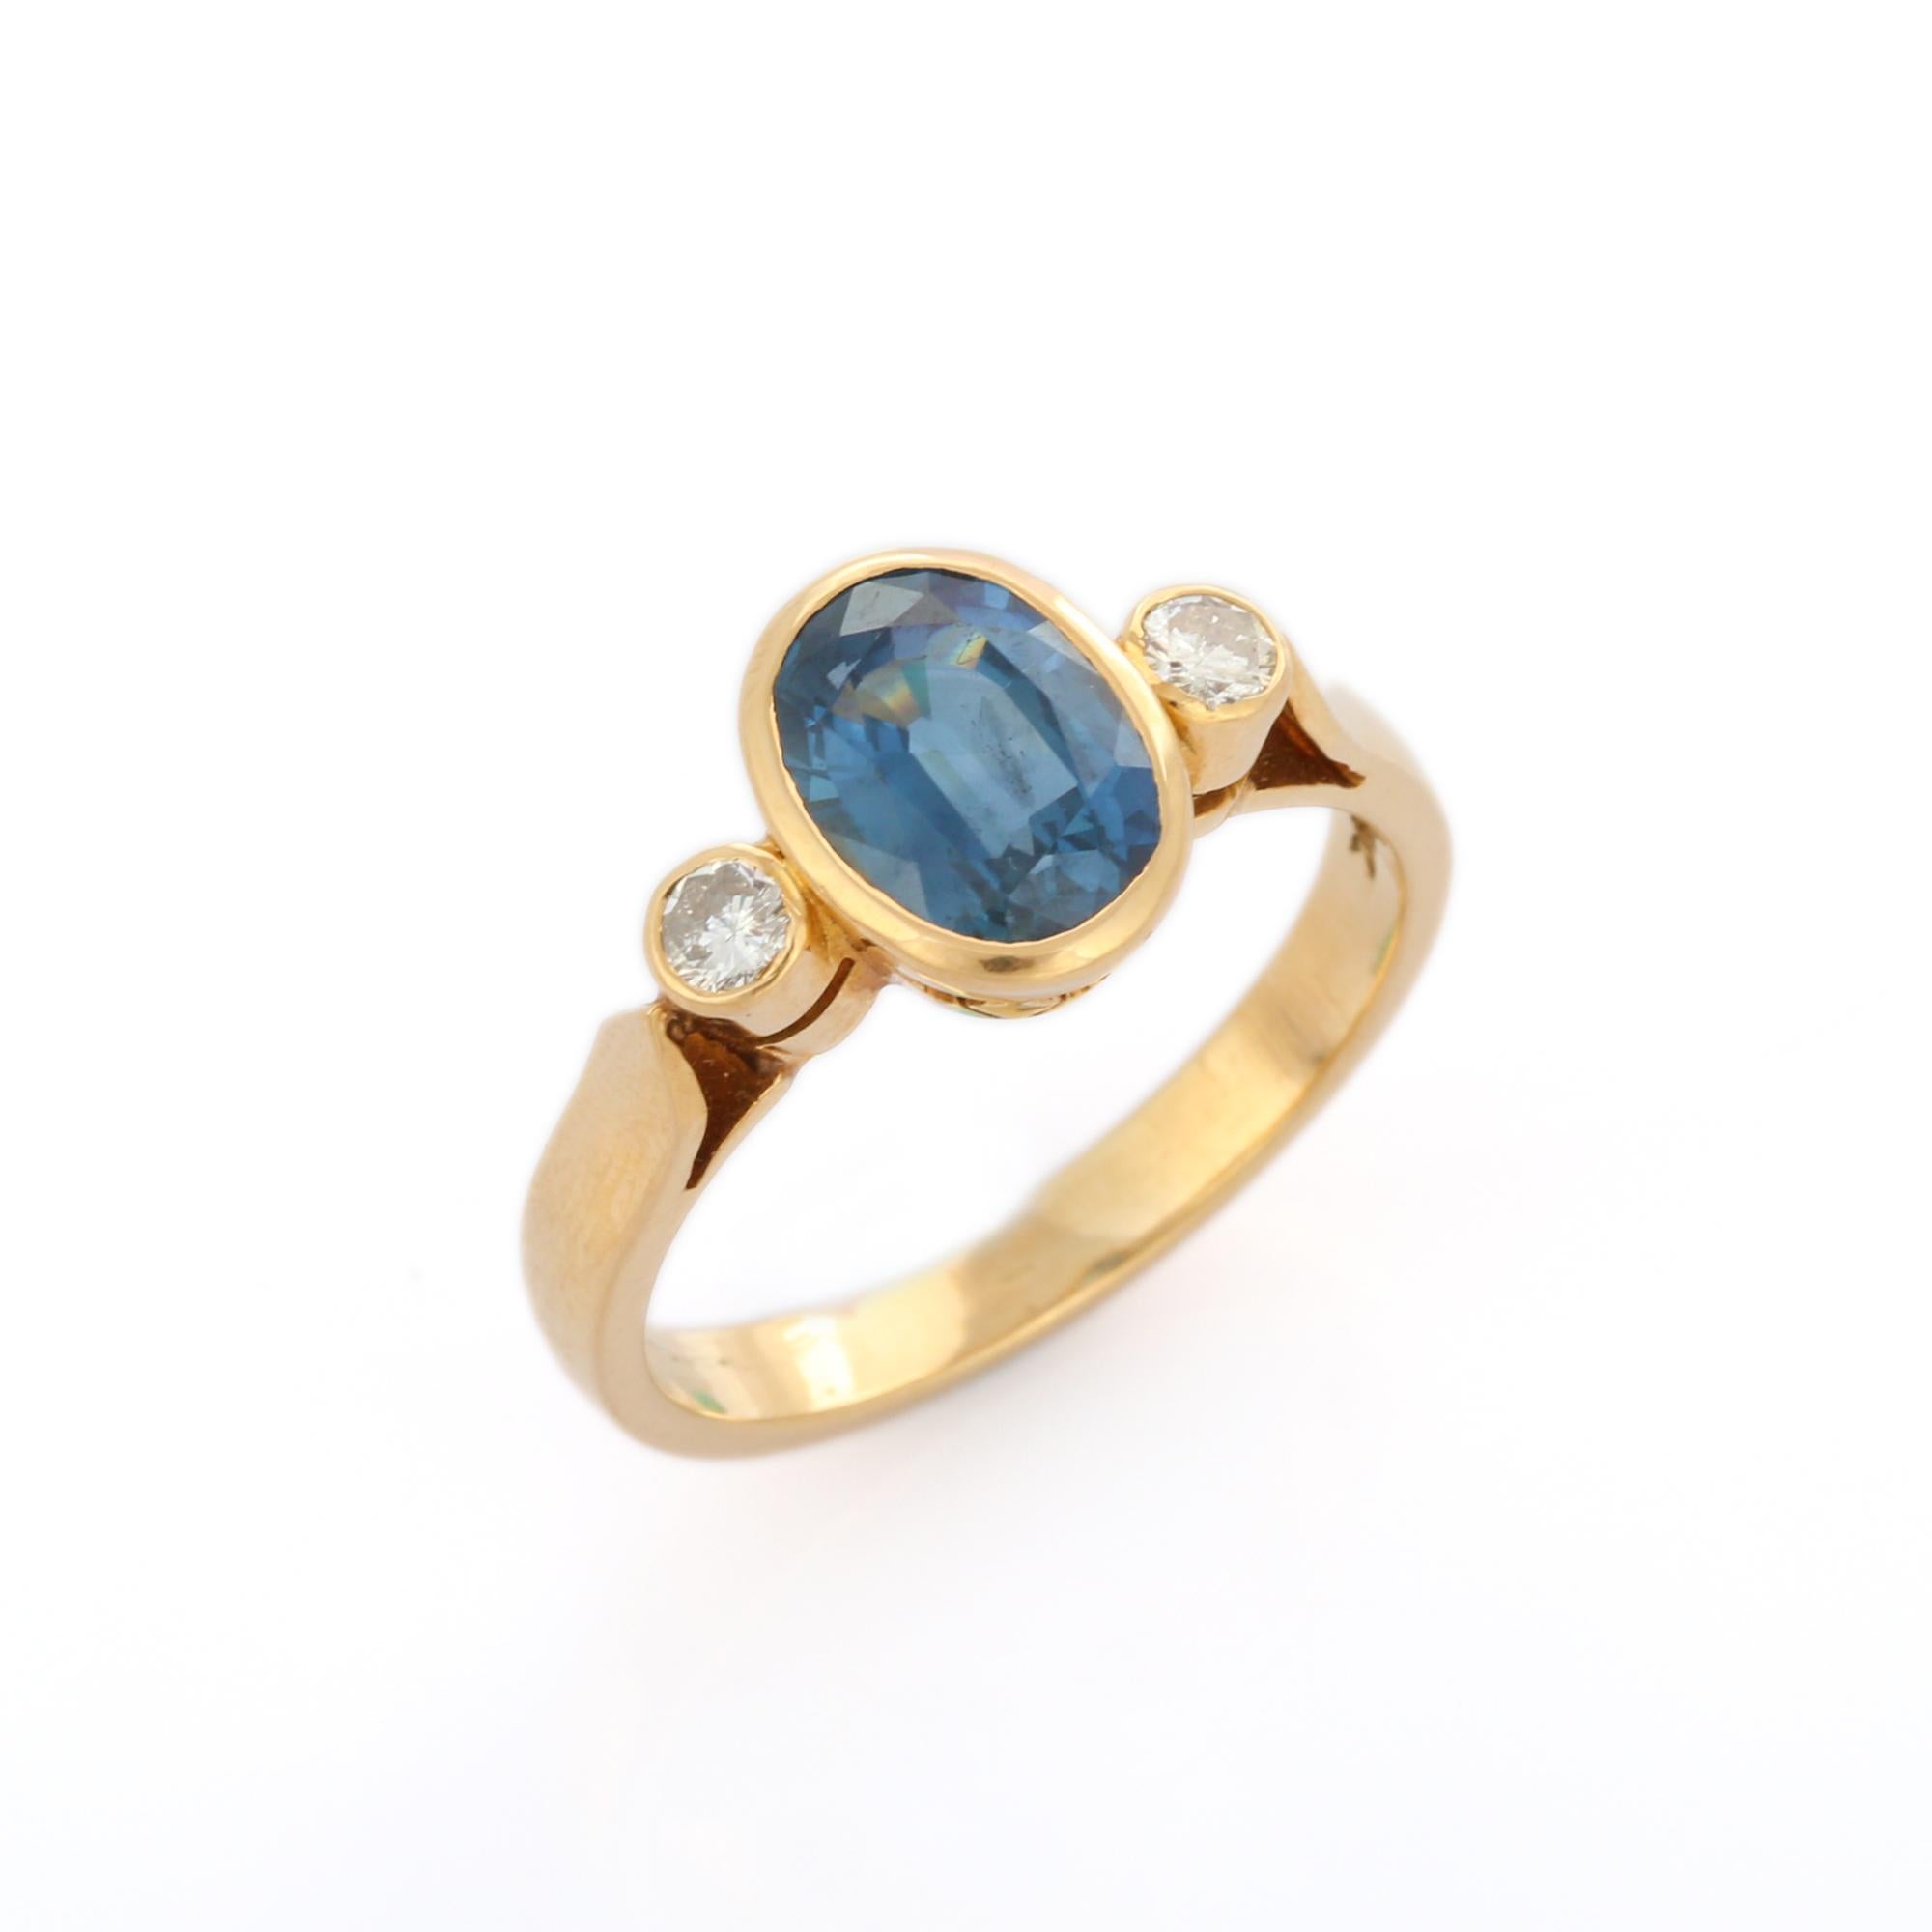 For Sale:  2.8 Ct Blue Sapphire & Diamond Three Stone Engagement Ring in 18K Yellow Gold 5